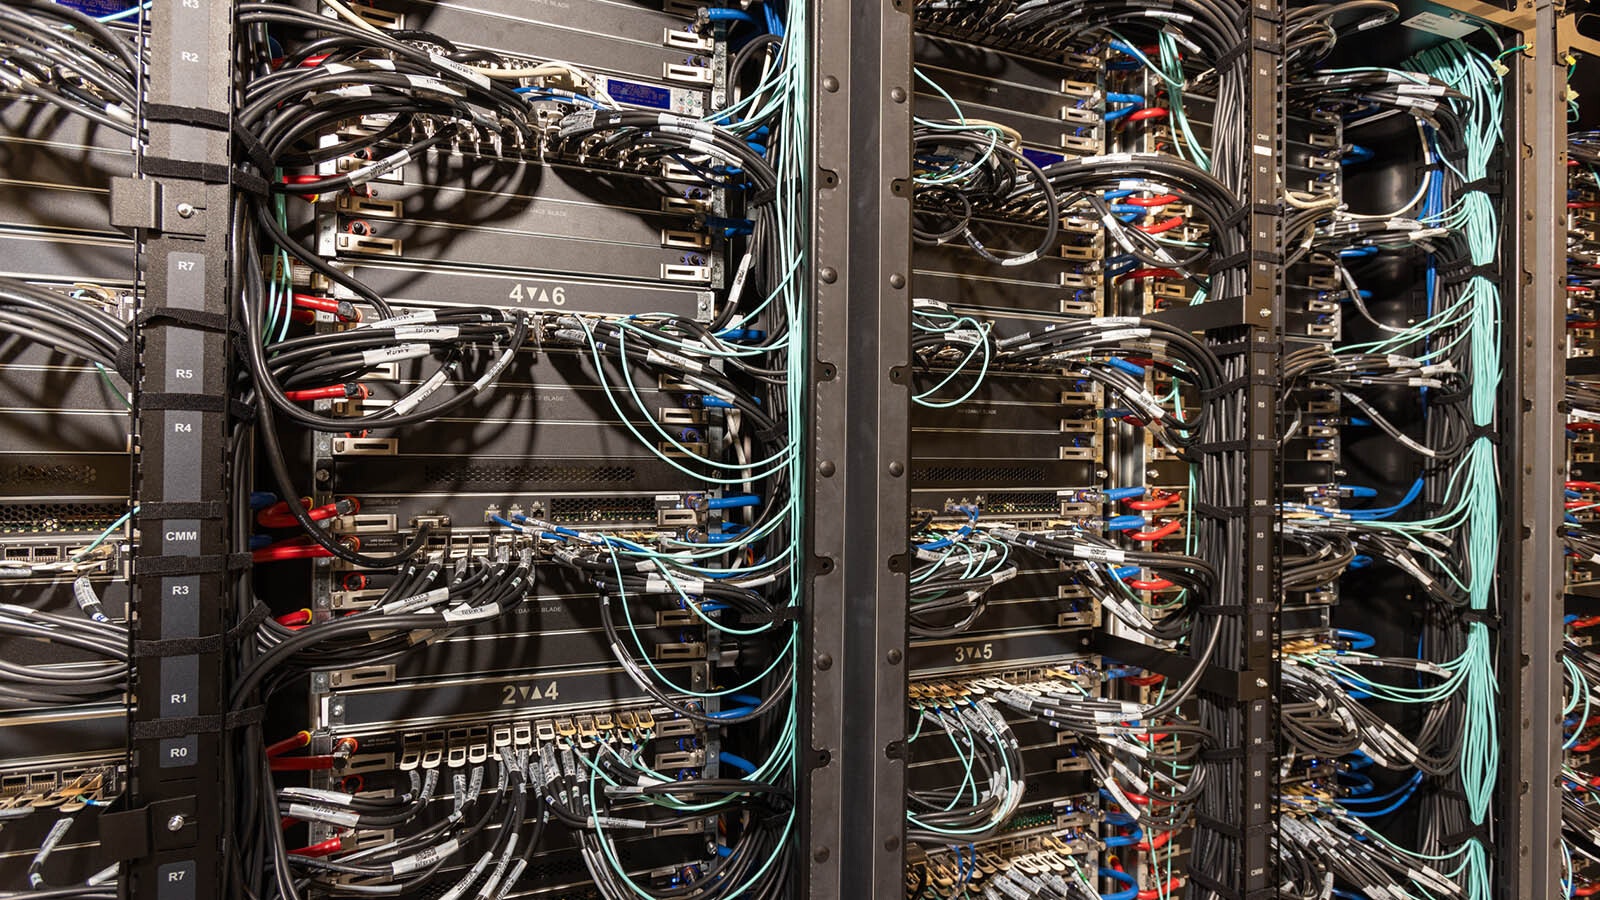 The Derecho supercompluter was installed at the Wyoming-NCAR Supercomputing Center in Cheyenne in 2023. It features 2,488 compute notes with 128 AMD Milan cores for each node, along with 82 nodes with four NVIDIA A100 GPUs each. It boasts a speed of 19.87 petaflops.